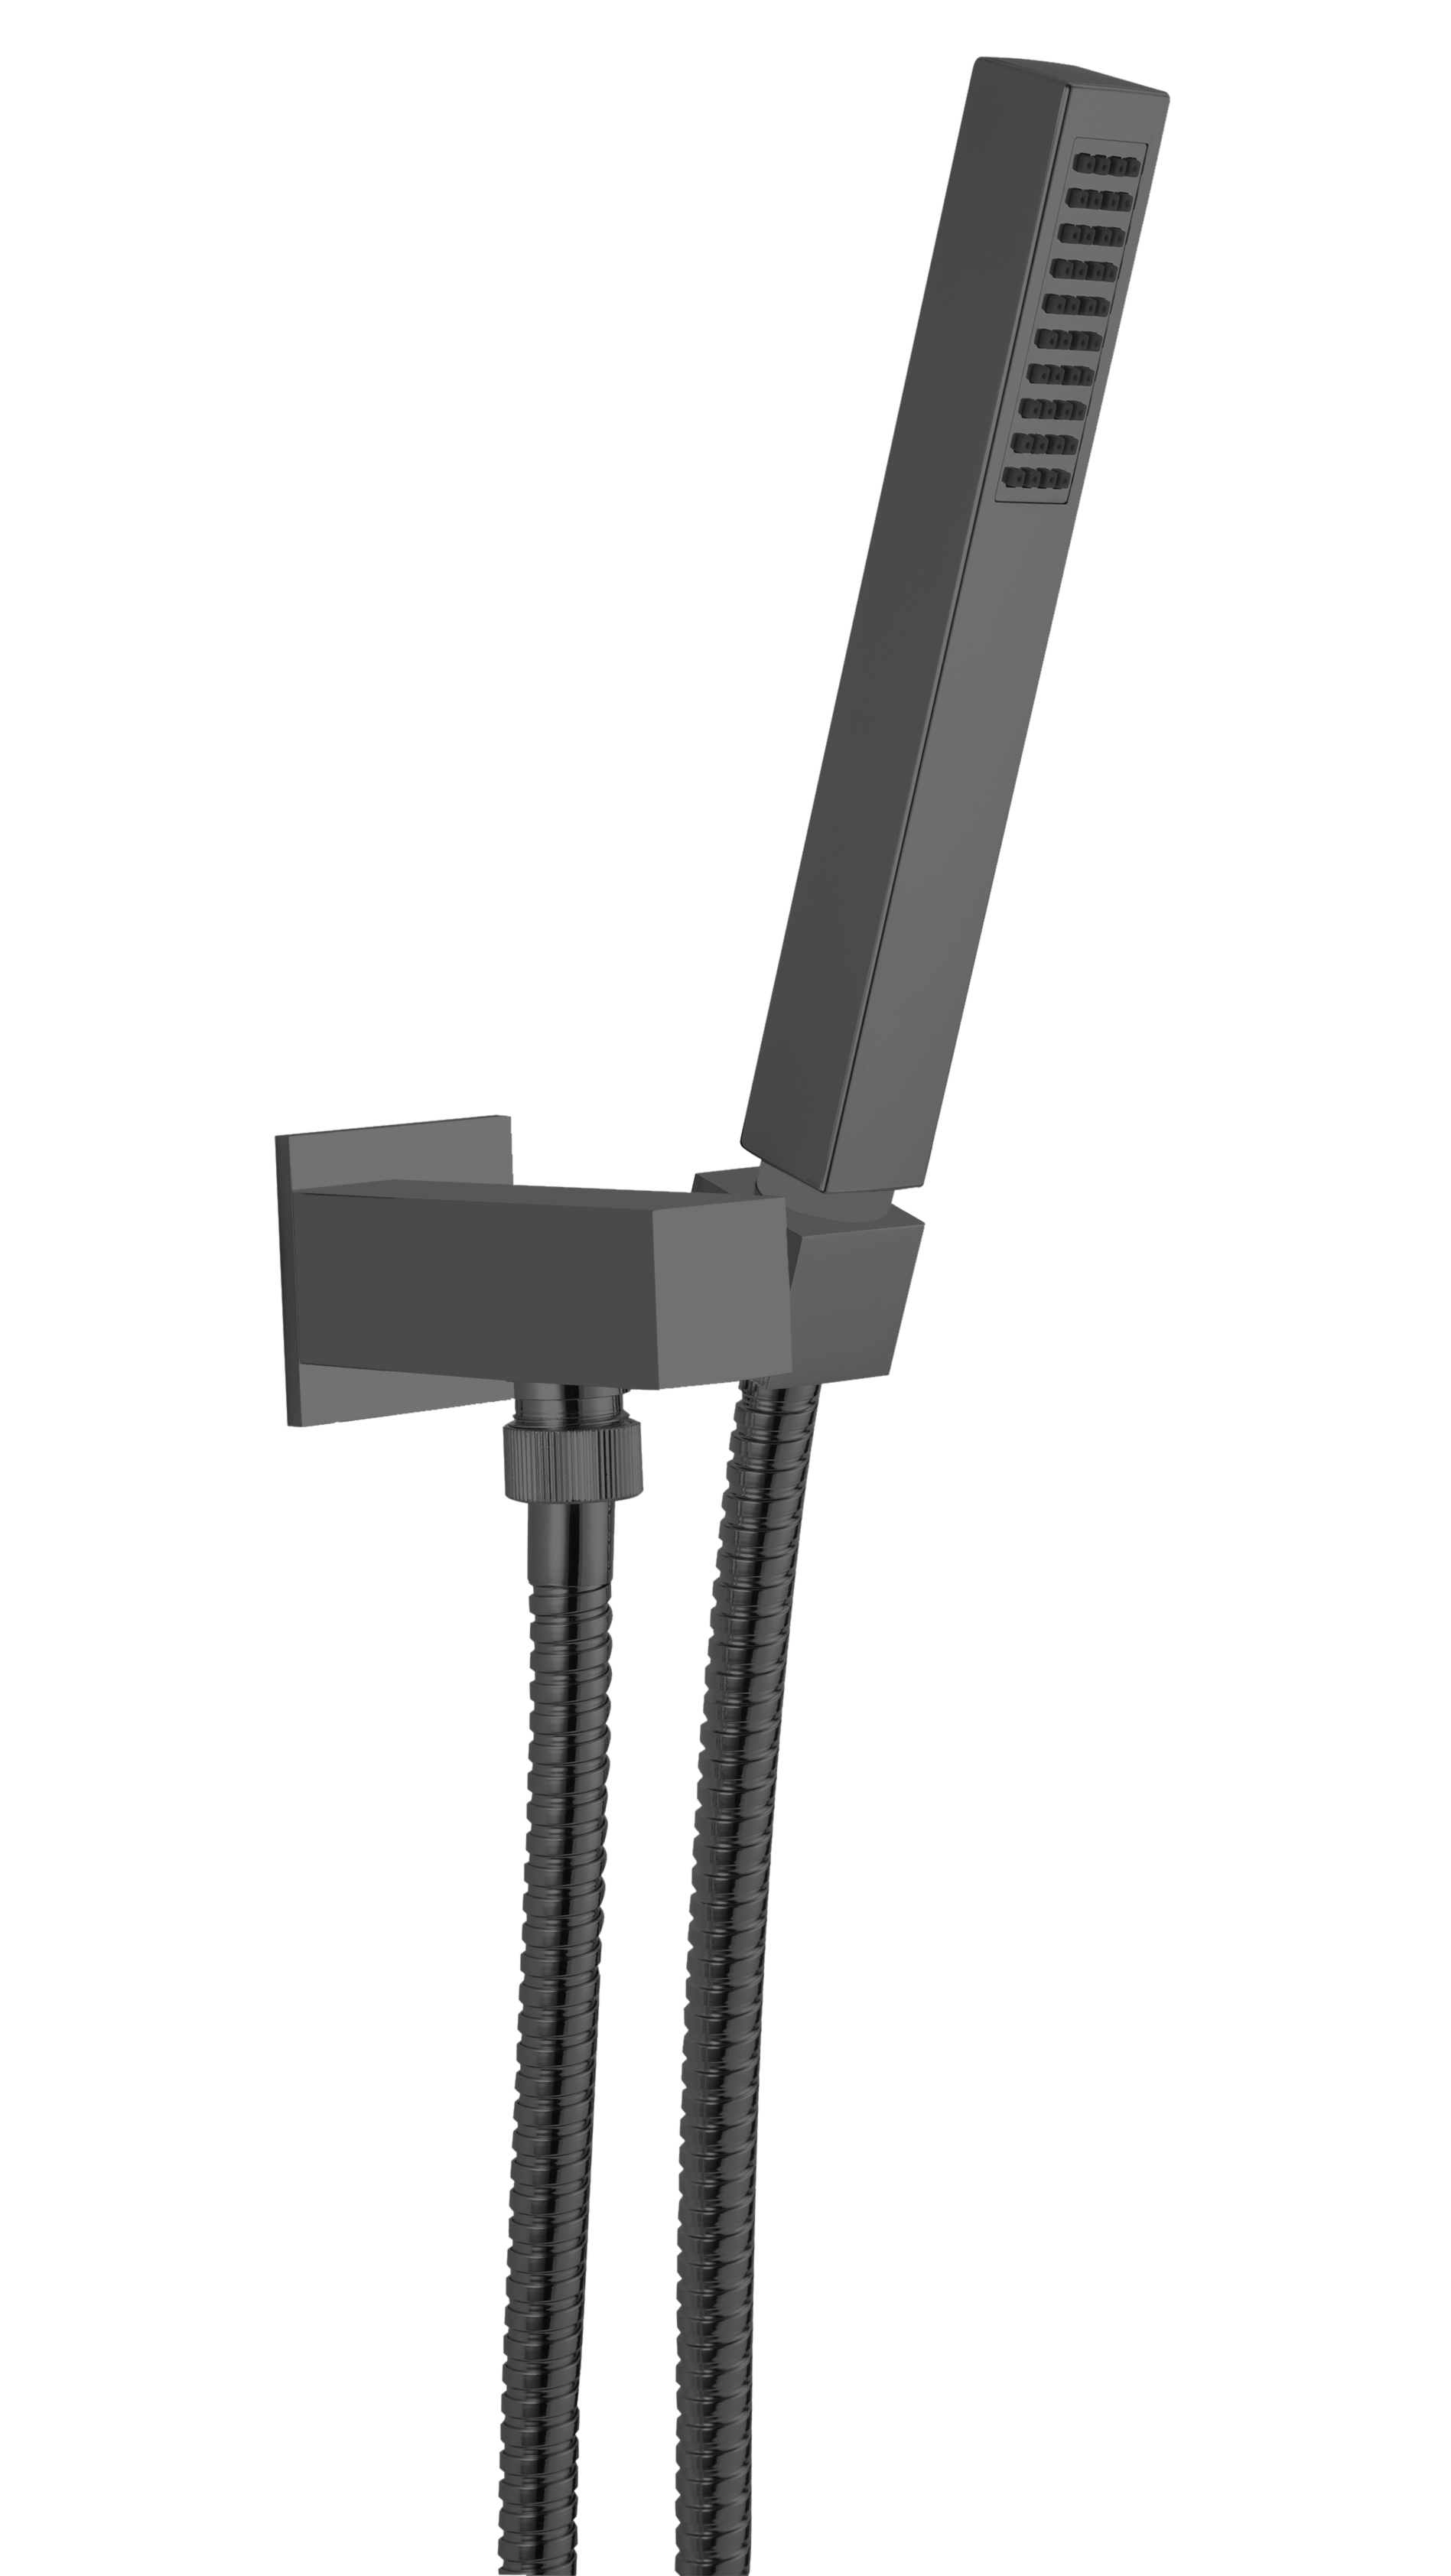 Wall water outlet with support,
flexible and brass hand shower, mat black